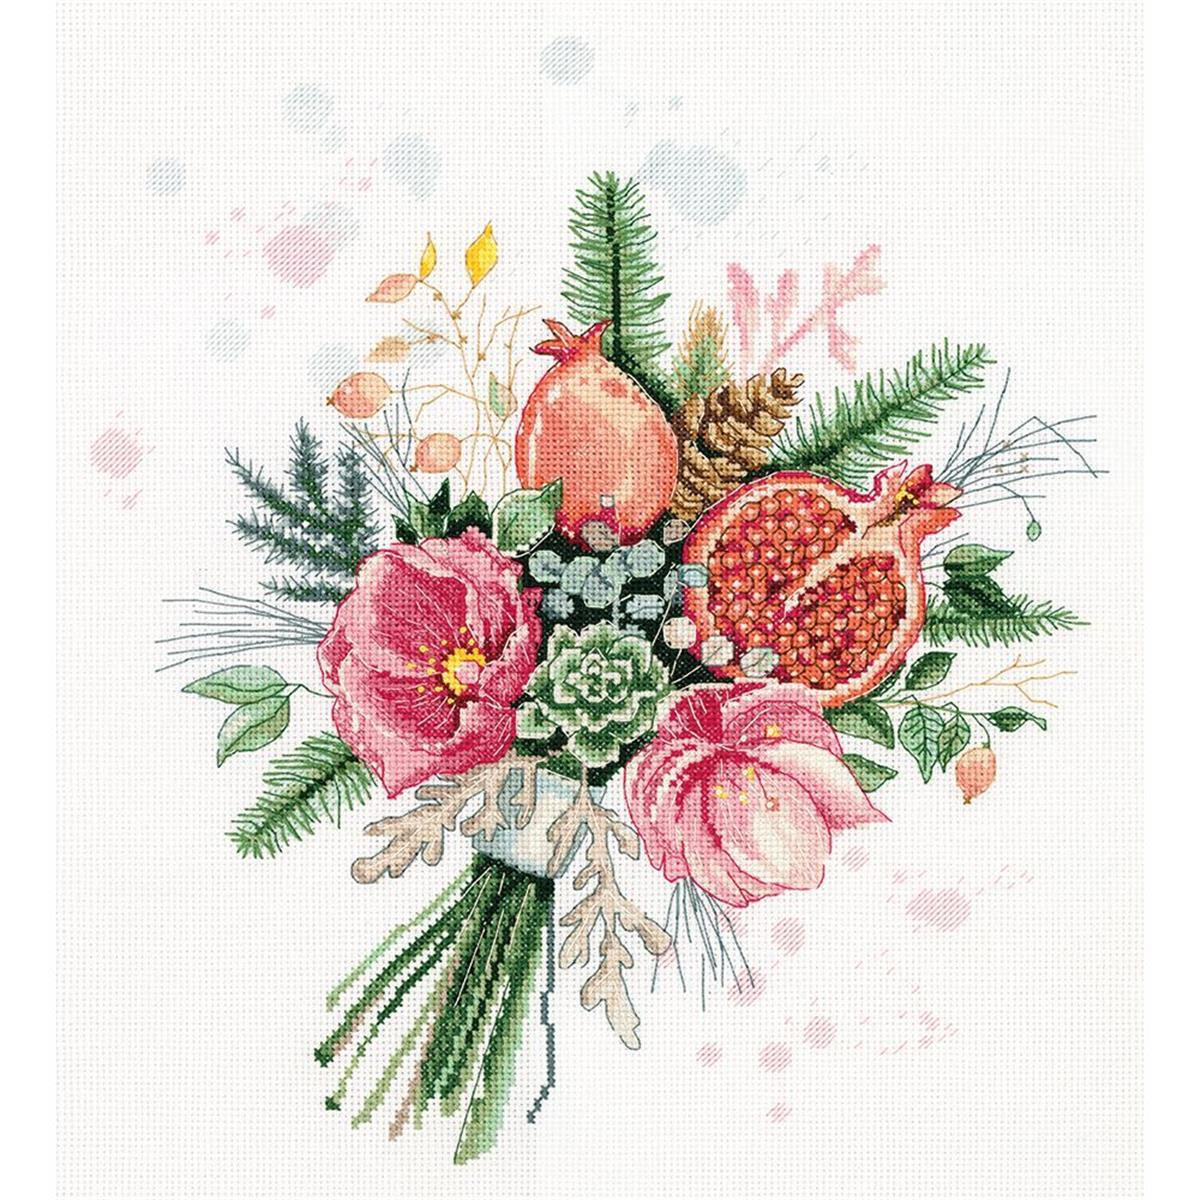 Panna counted cross stitch kit "Bouquet and...